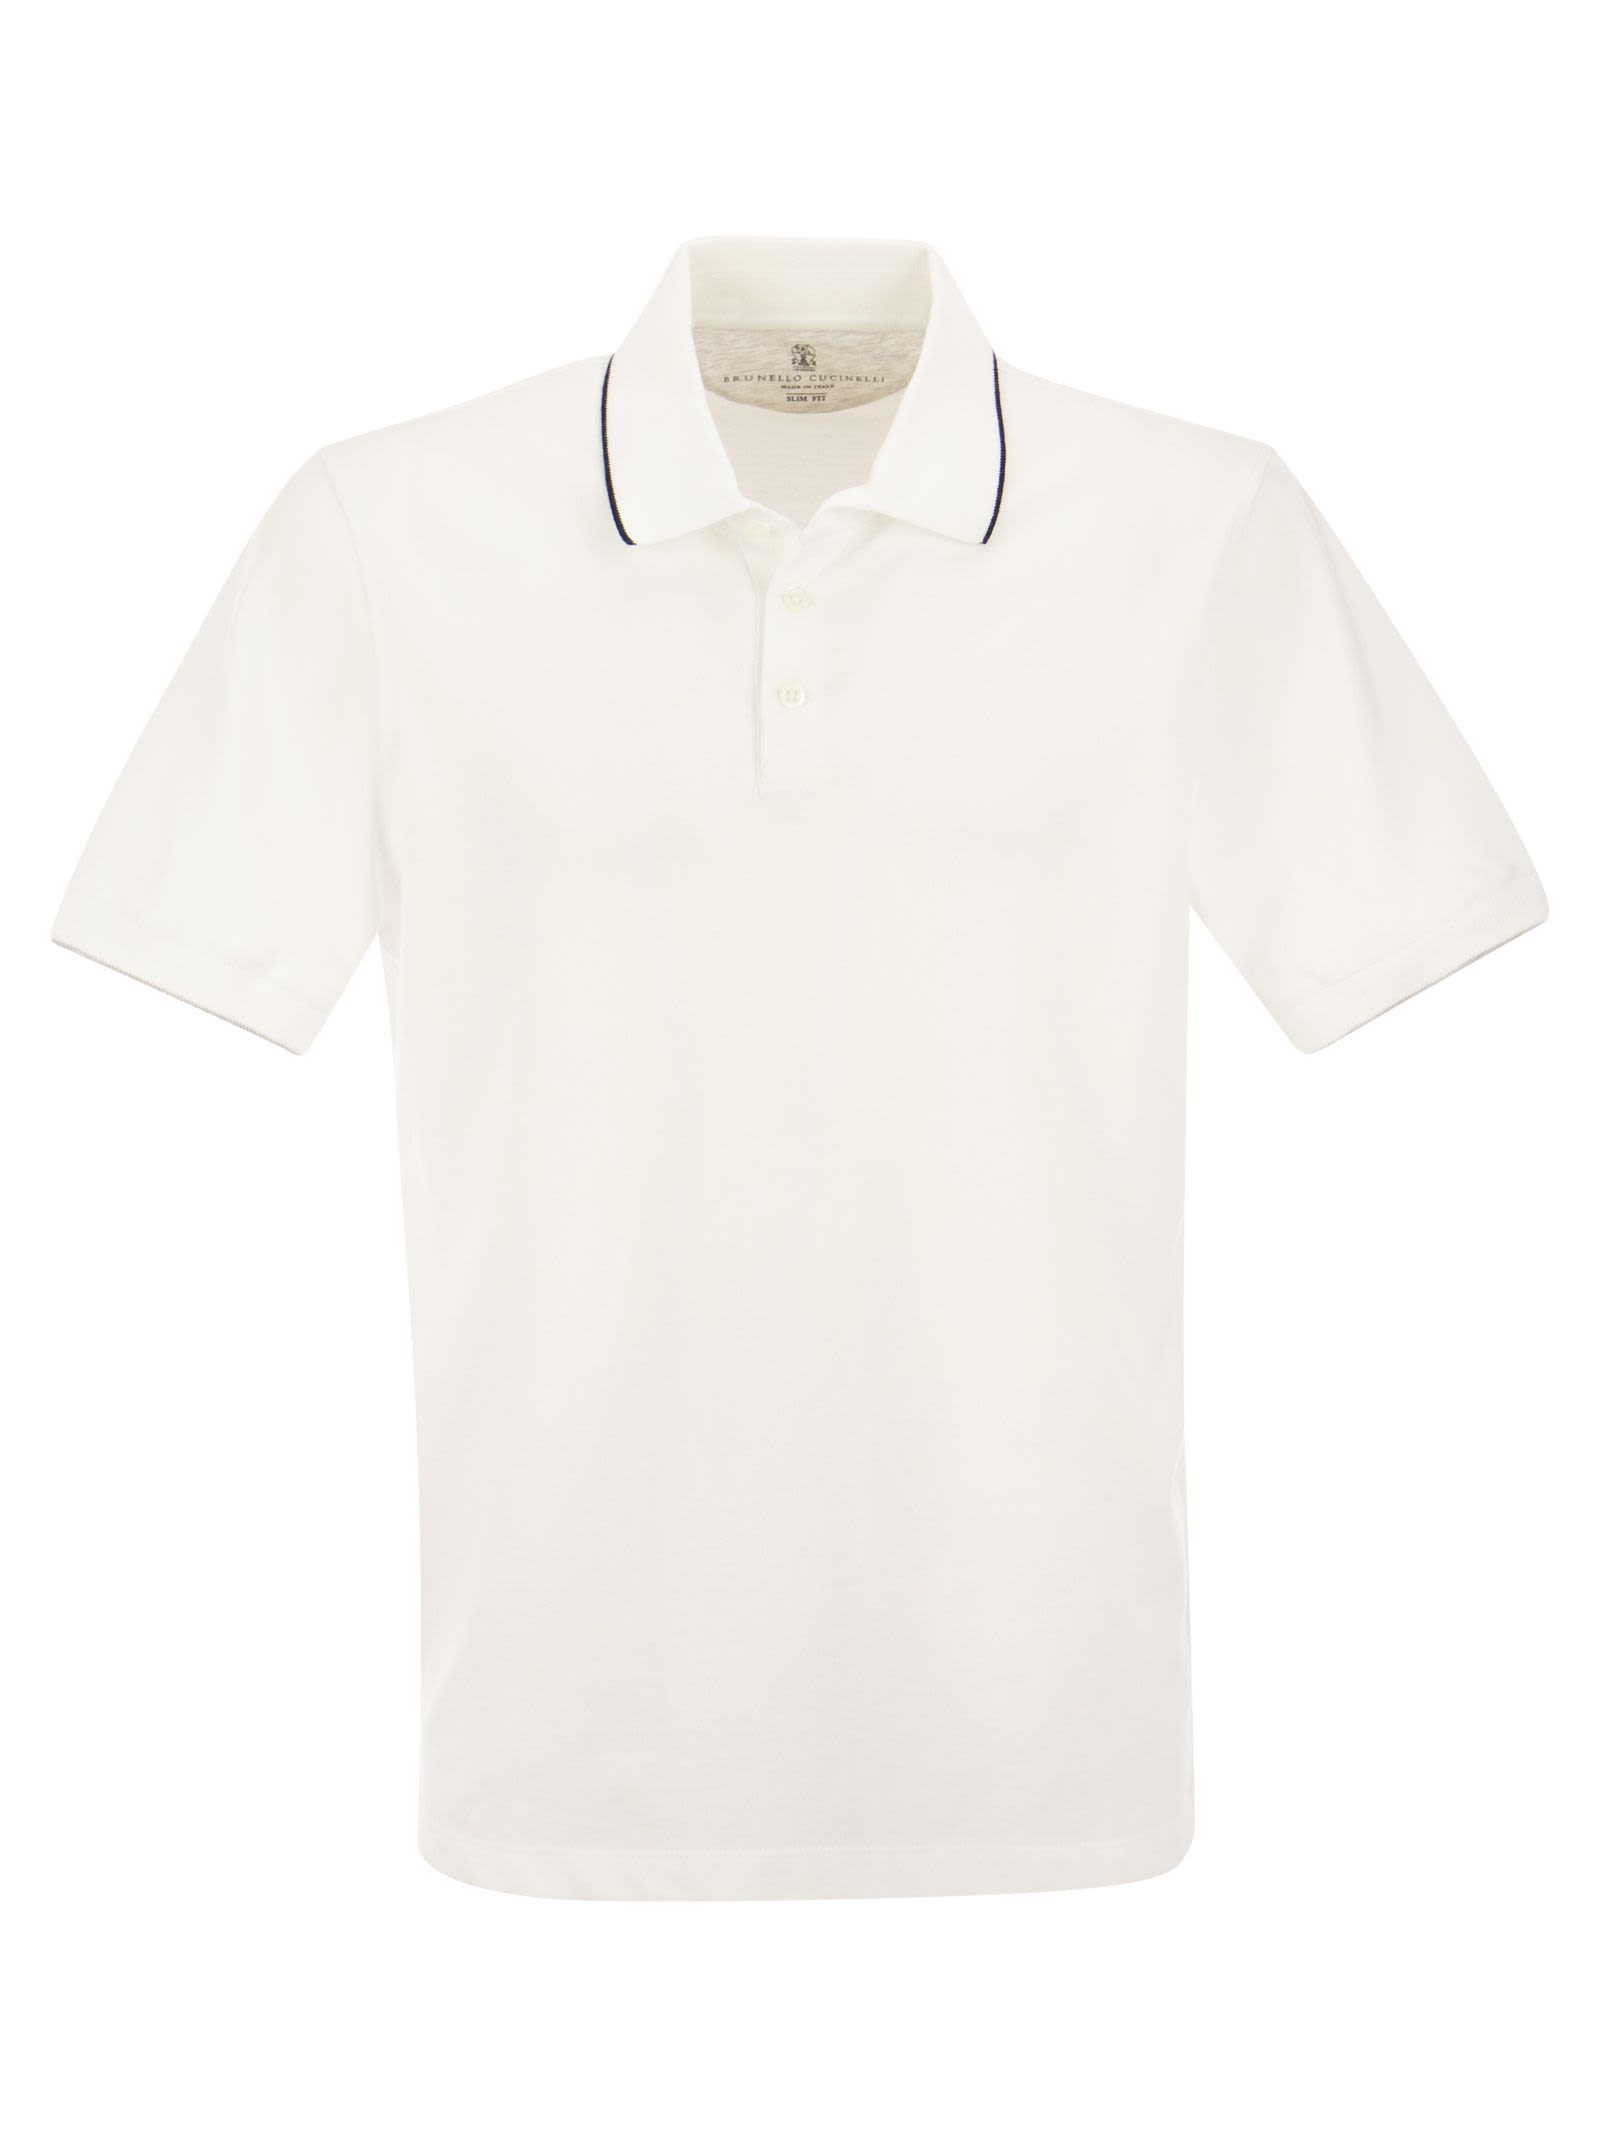 Brunello Cucinelli Slim Fit Cotton Pique Polo Shirt With Knitted Details